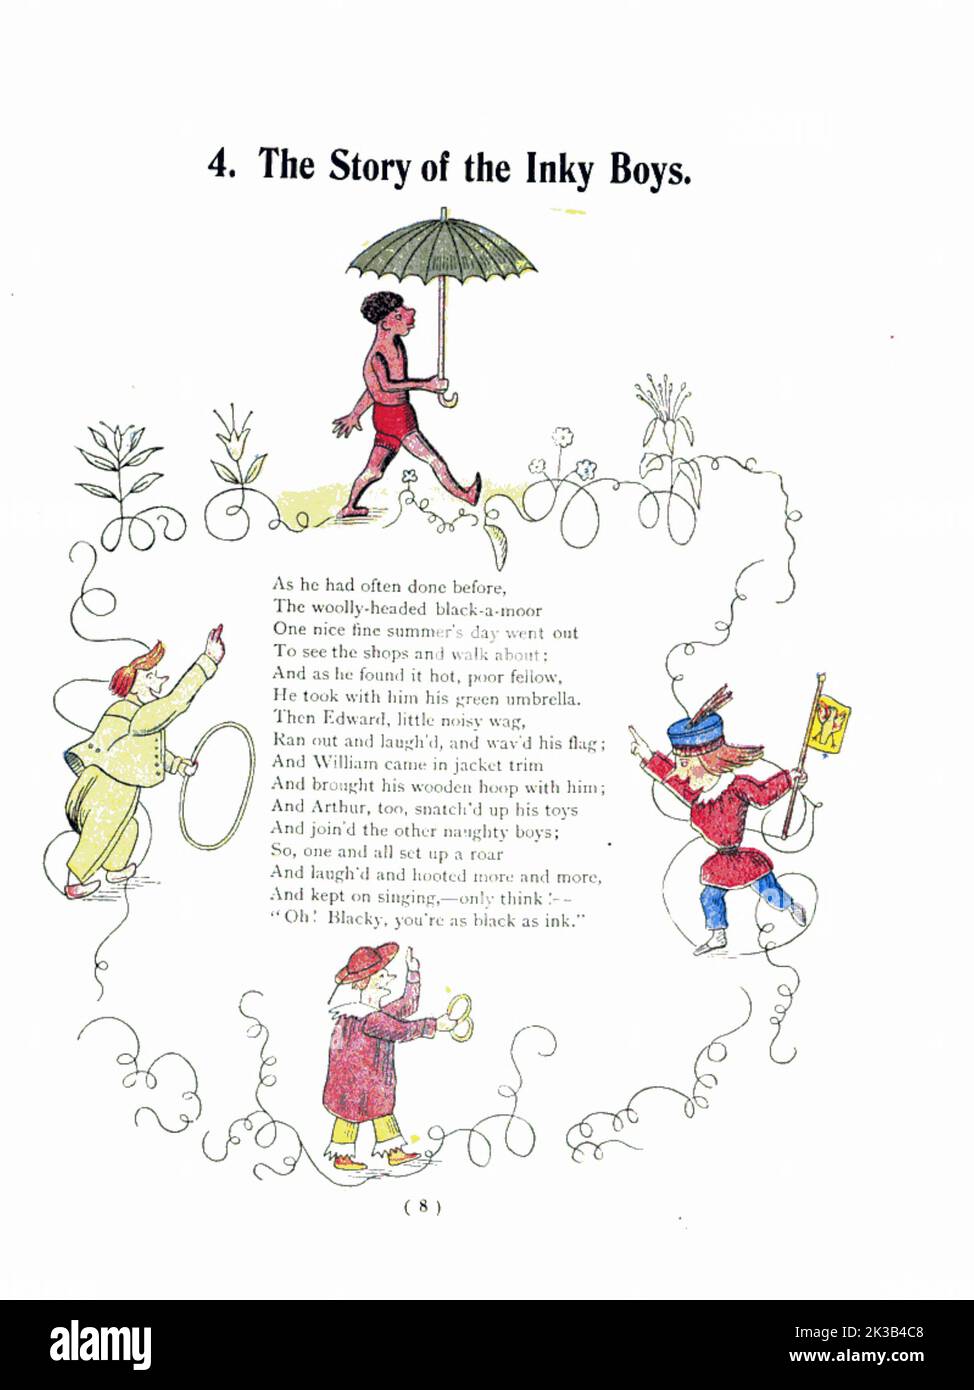 The Story of the Inky Boys from ' The Struwwelpeter painting book ' Pretty Stories and Funny Pictures for Little Children by Heinrich Hoffmann Published in London in 1900 Stock Photo